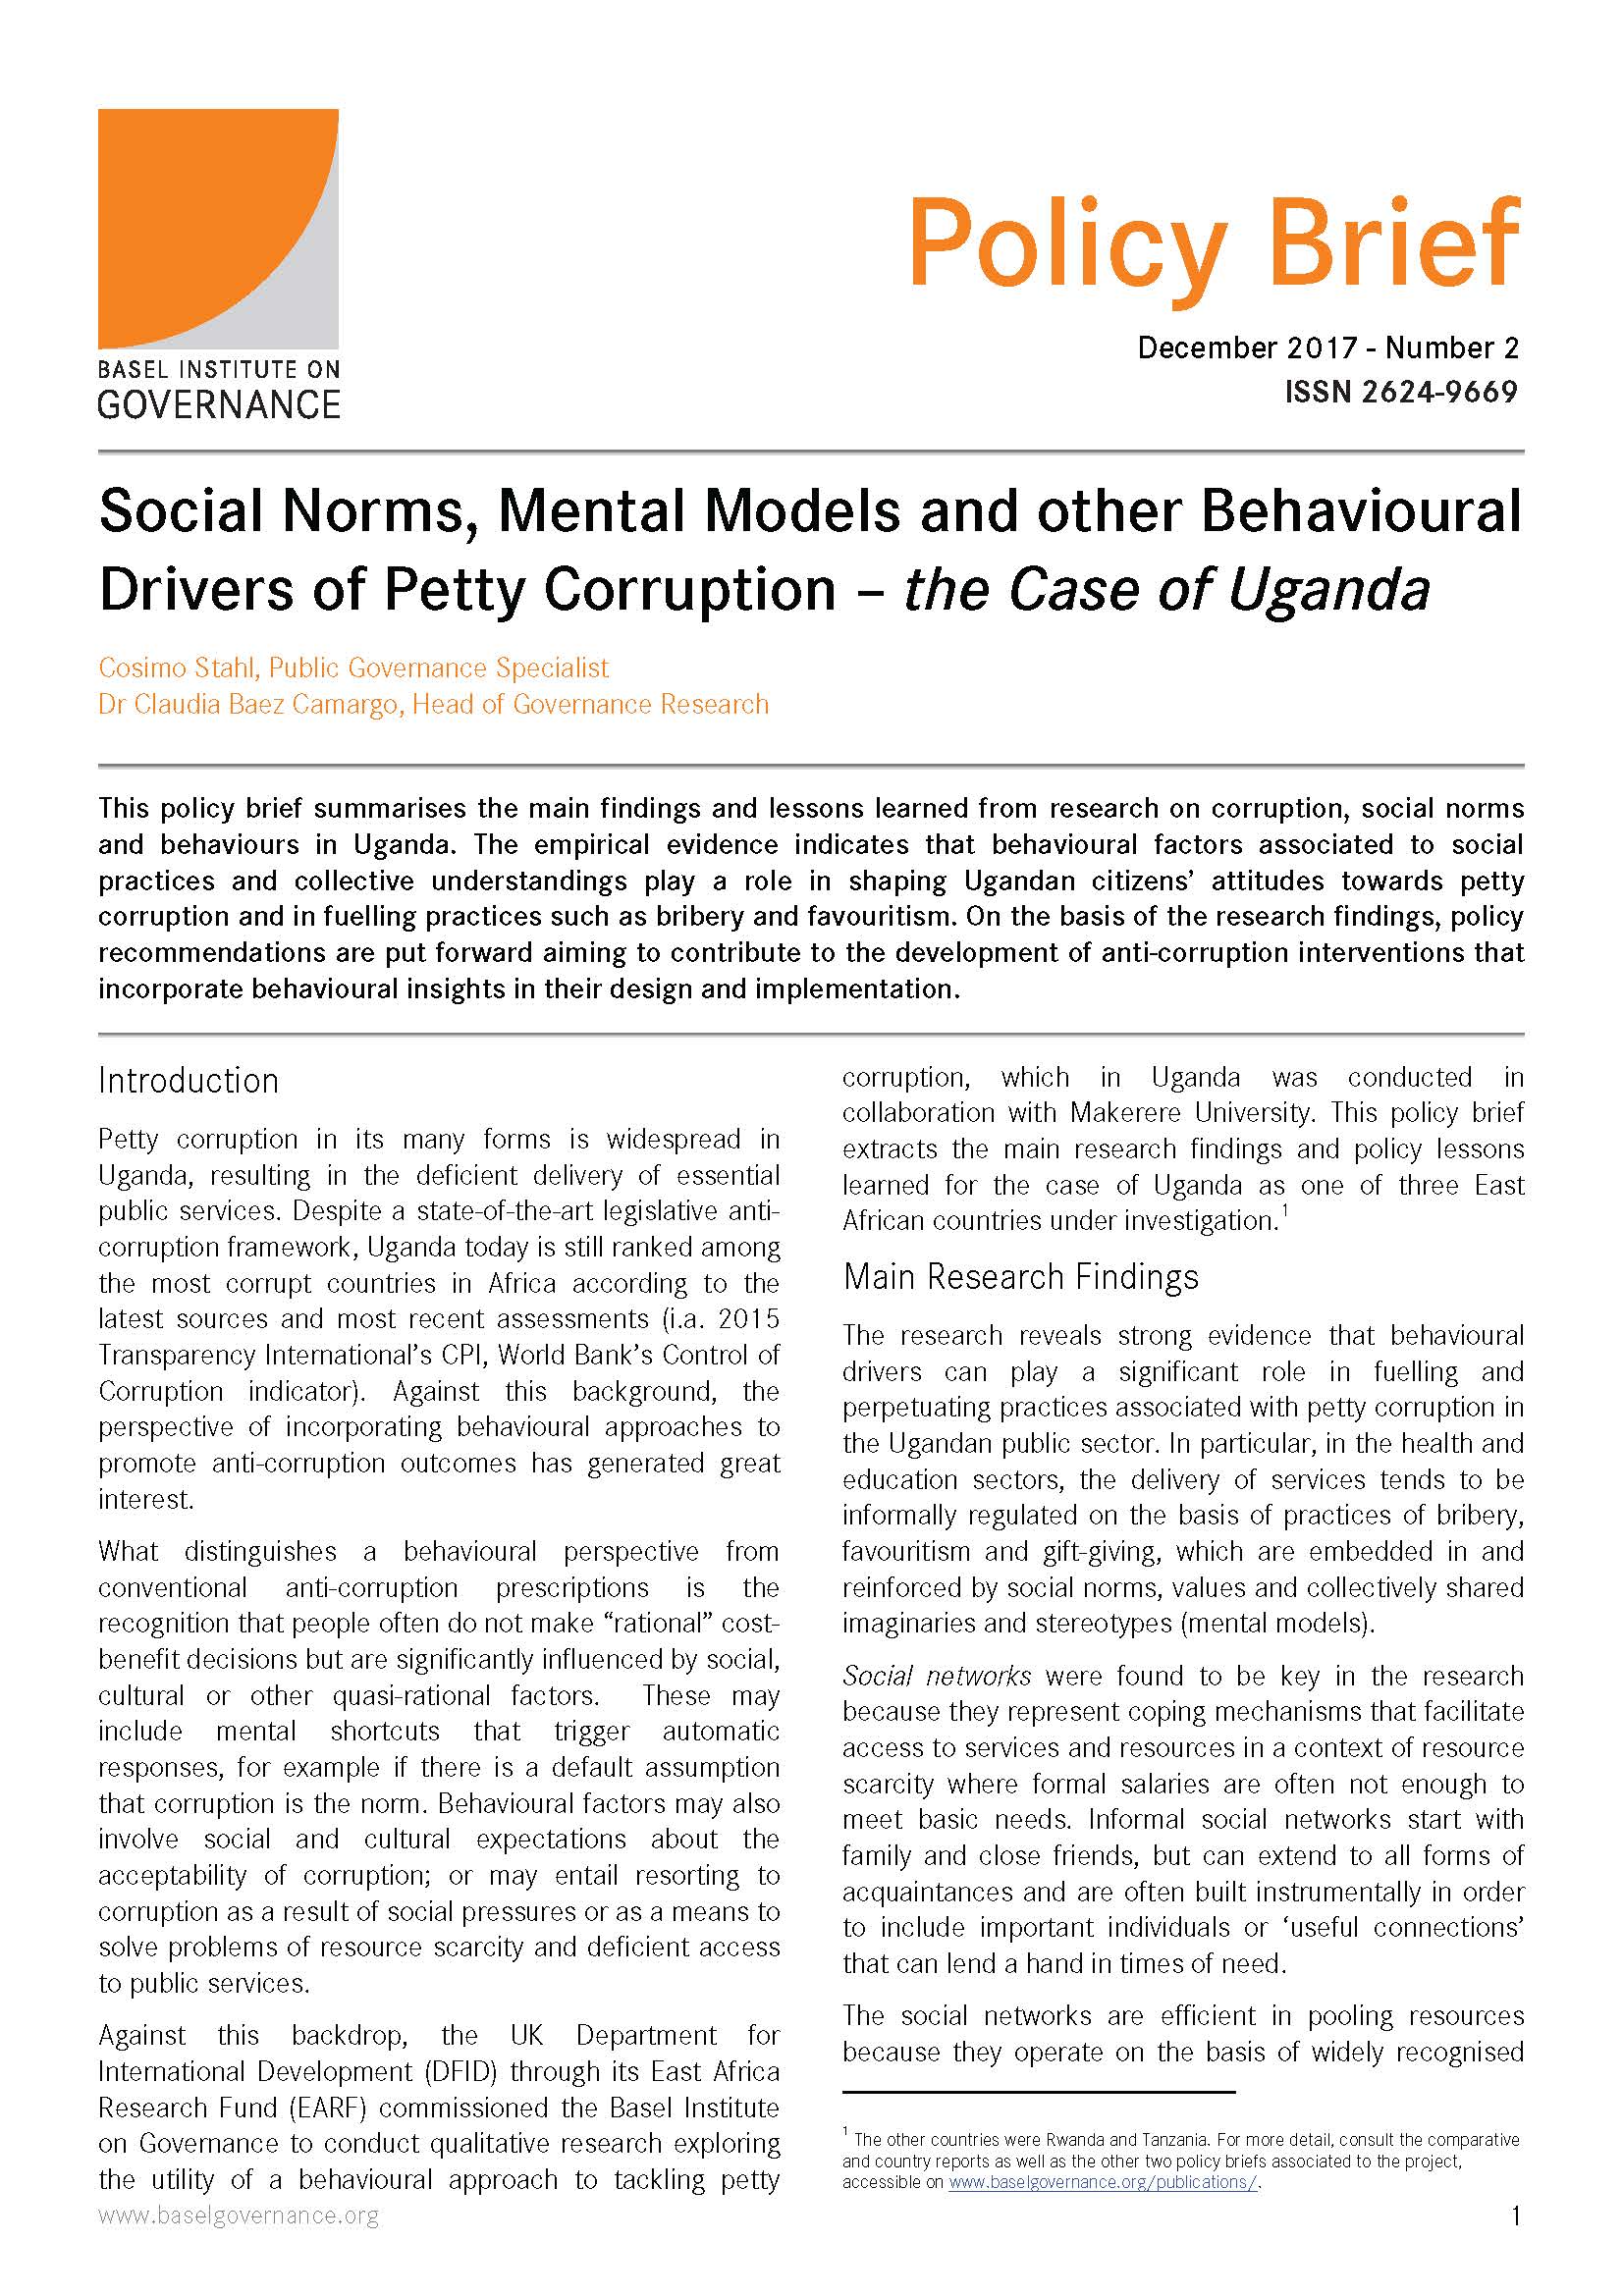 Cover page of Policy Brief 2